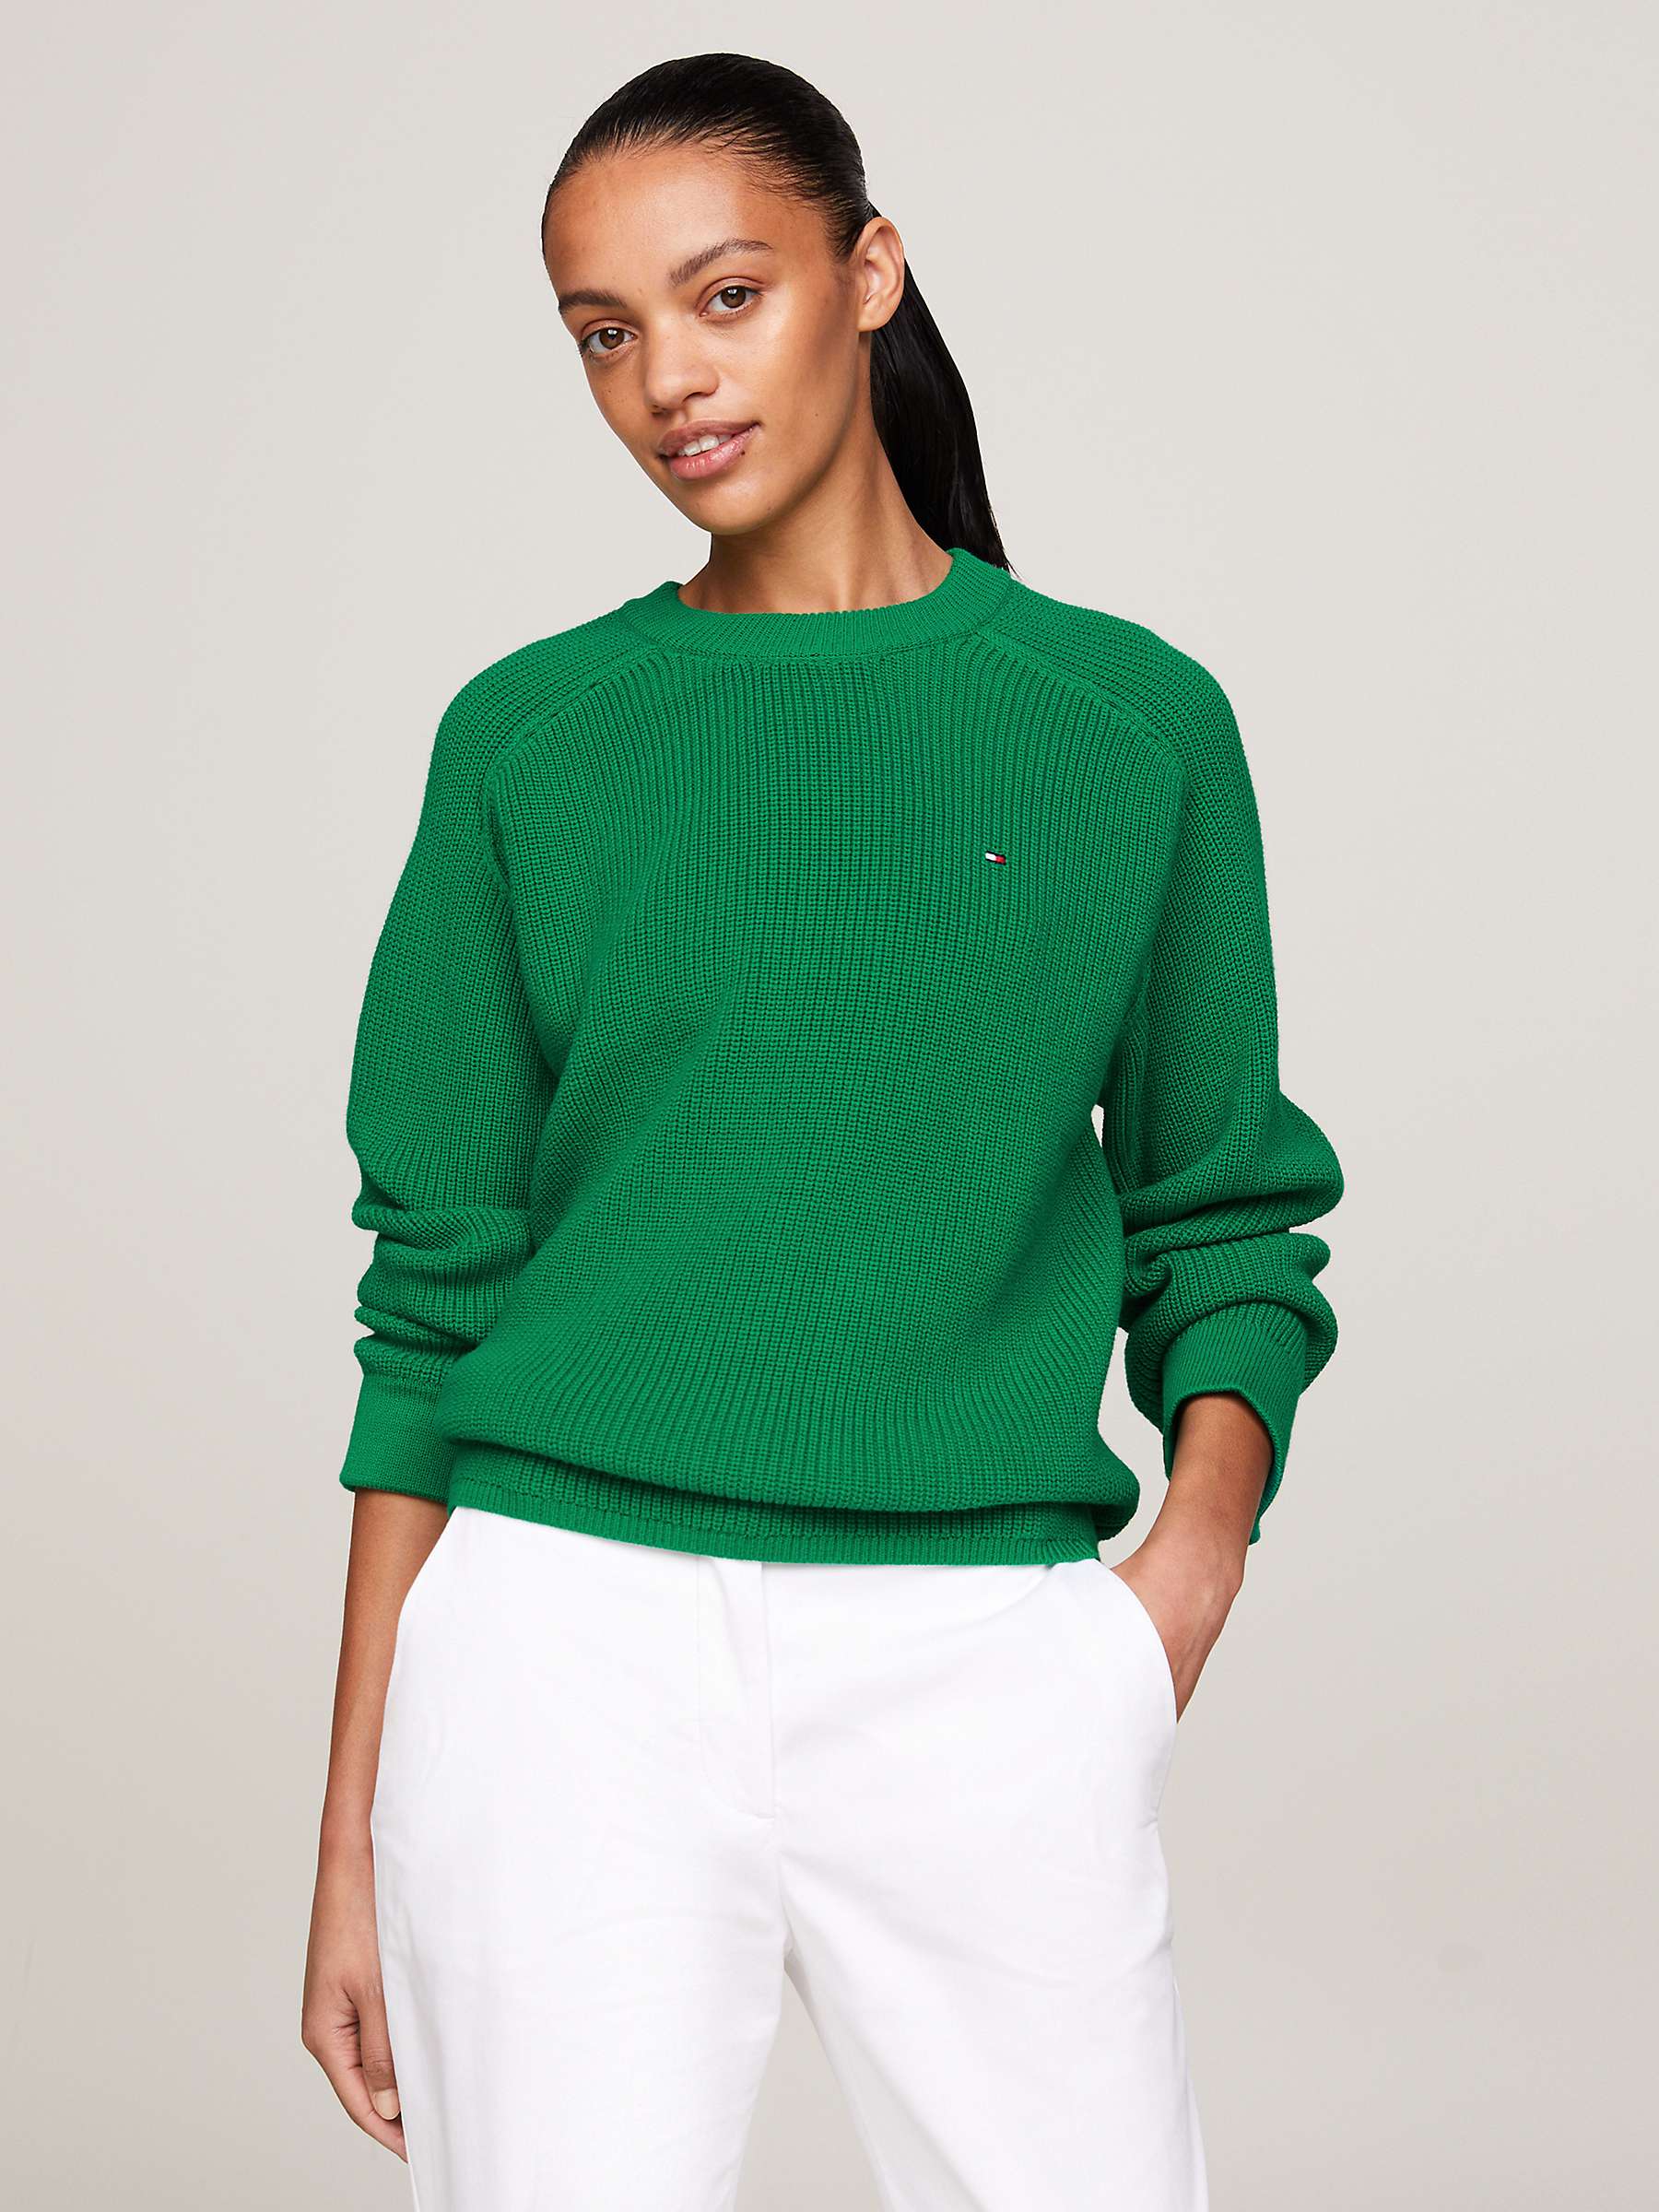 Buy Tommy Hilfiger Rib Knit Crew Neck Jumper, Olympic Green Online at johnlewis.com